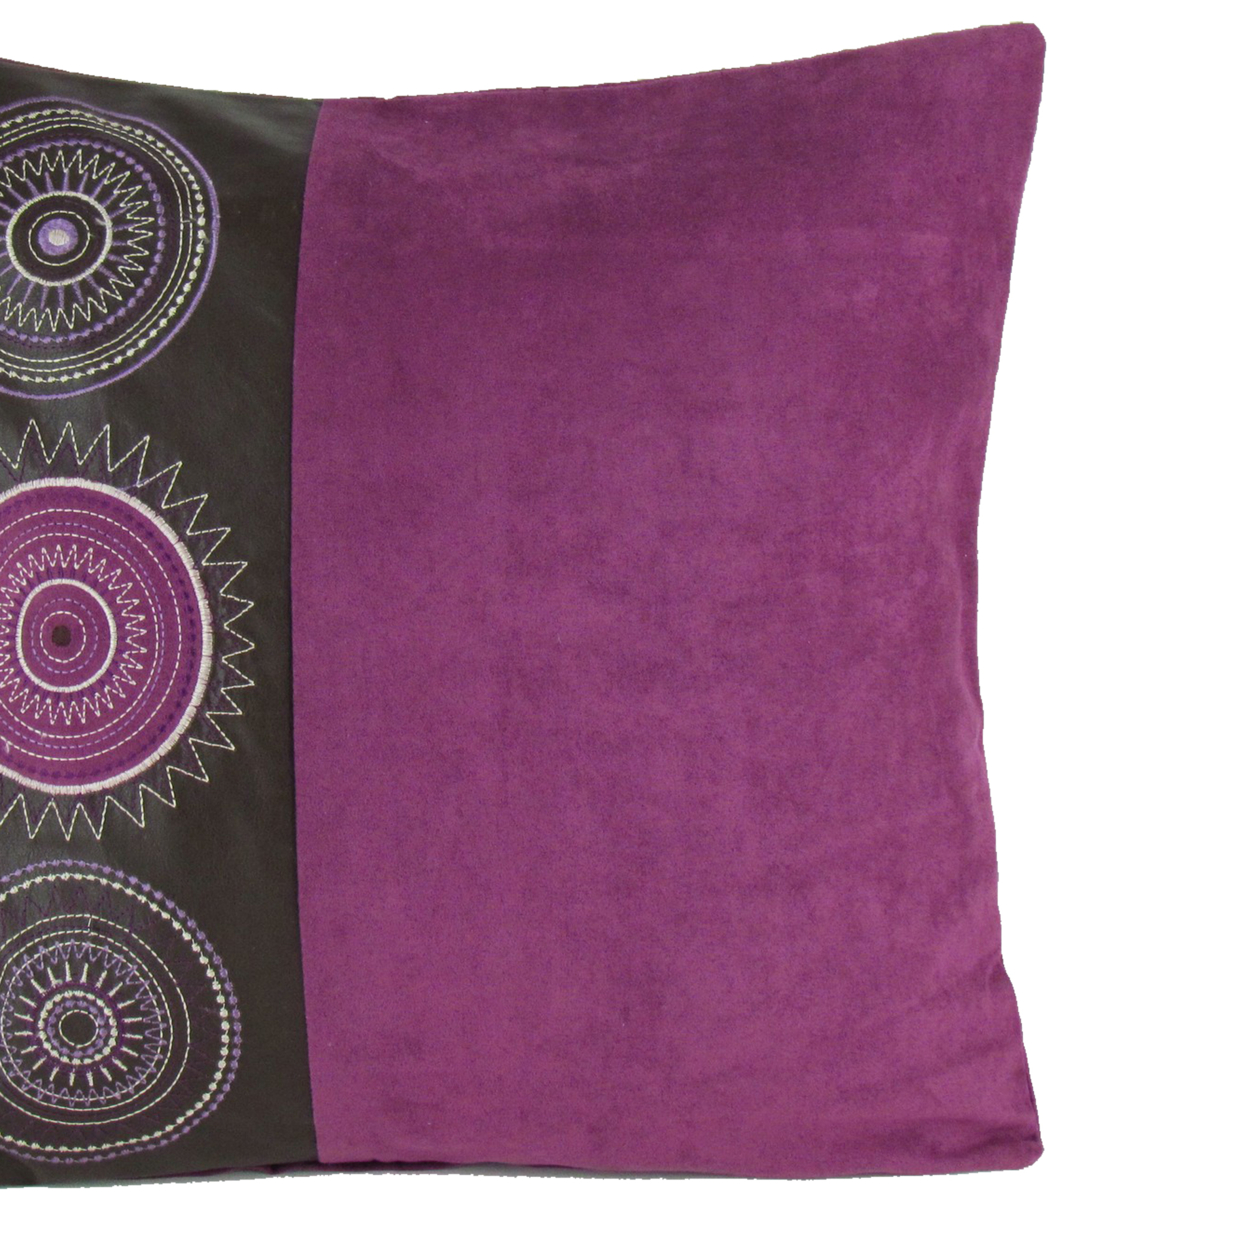 Leatherette And Fabric Accent Pillow, Purple And Brown- Saltoro Sherpi